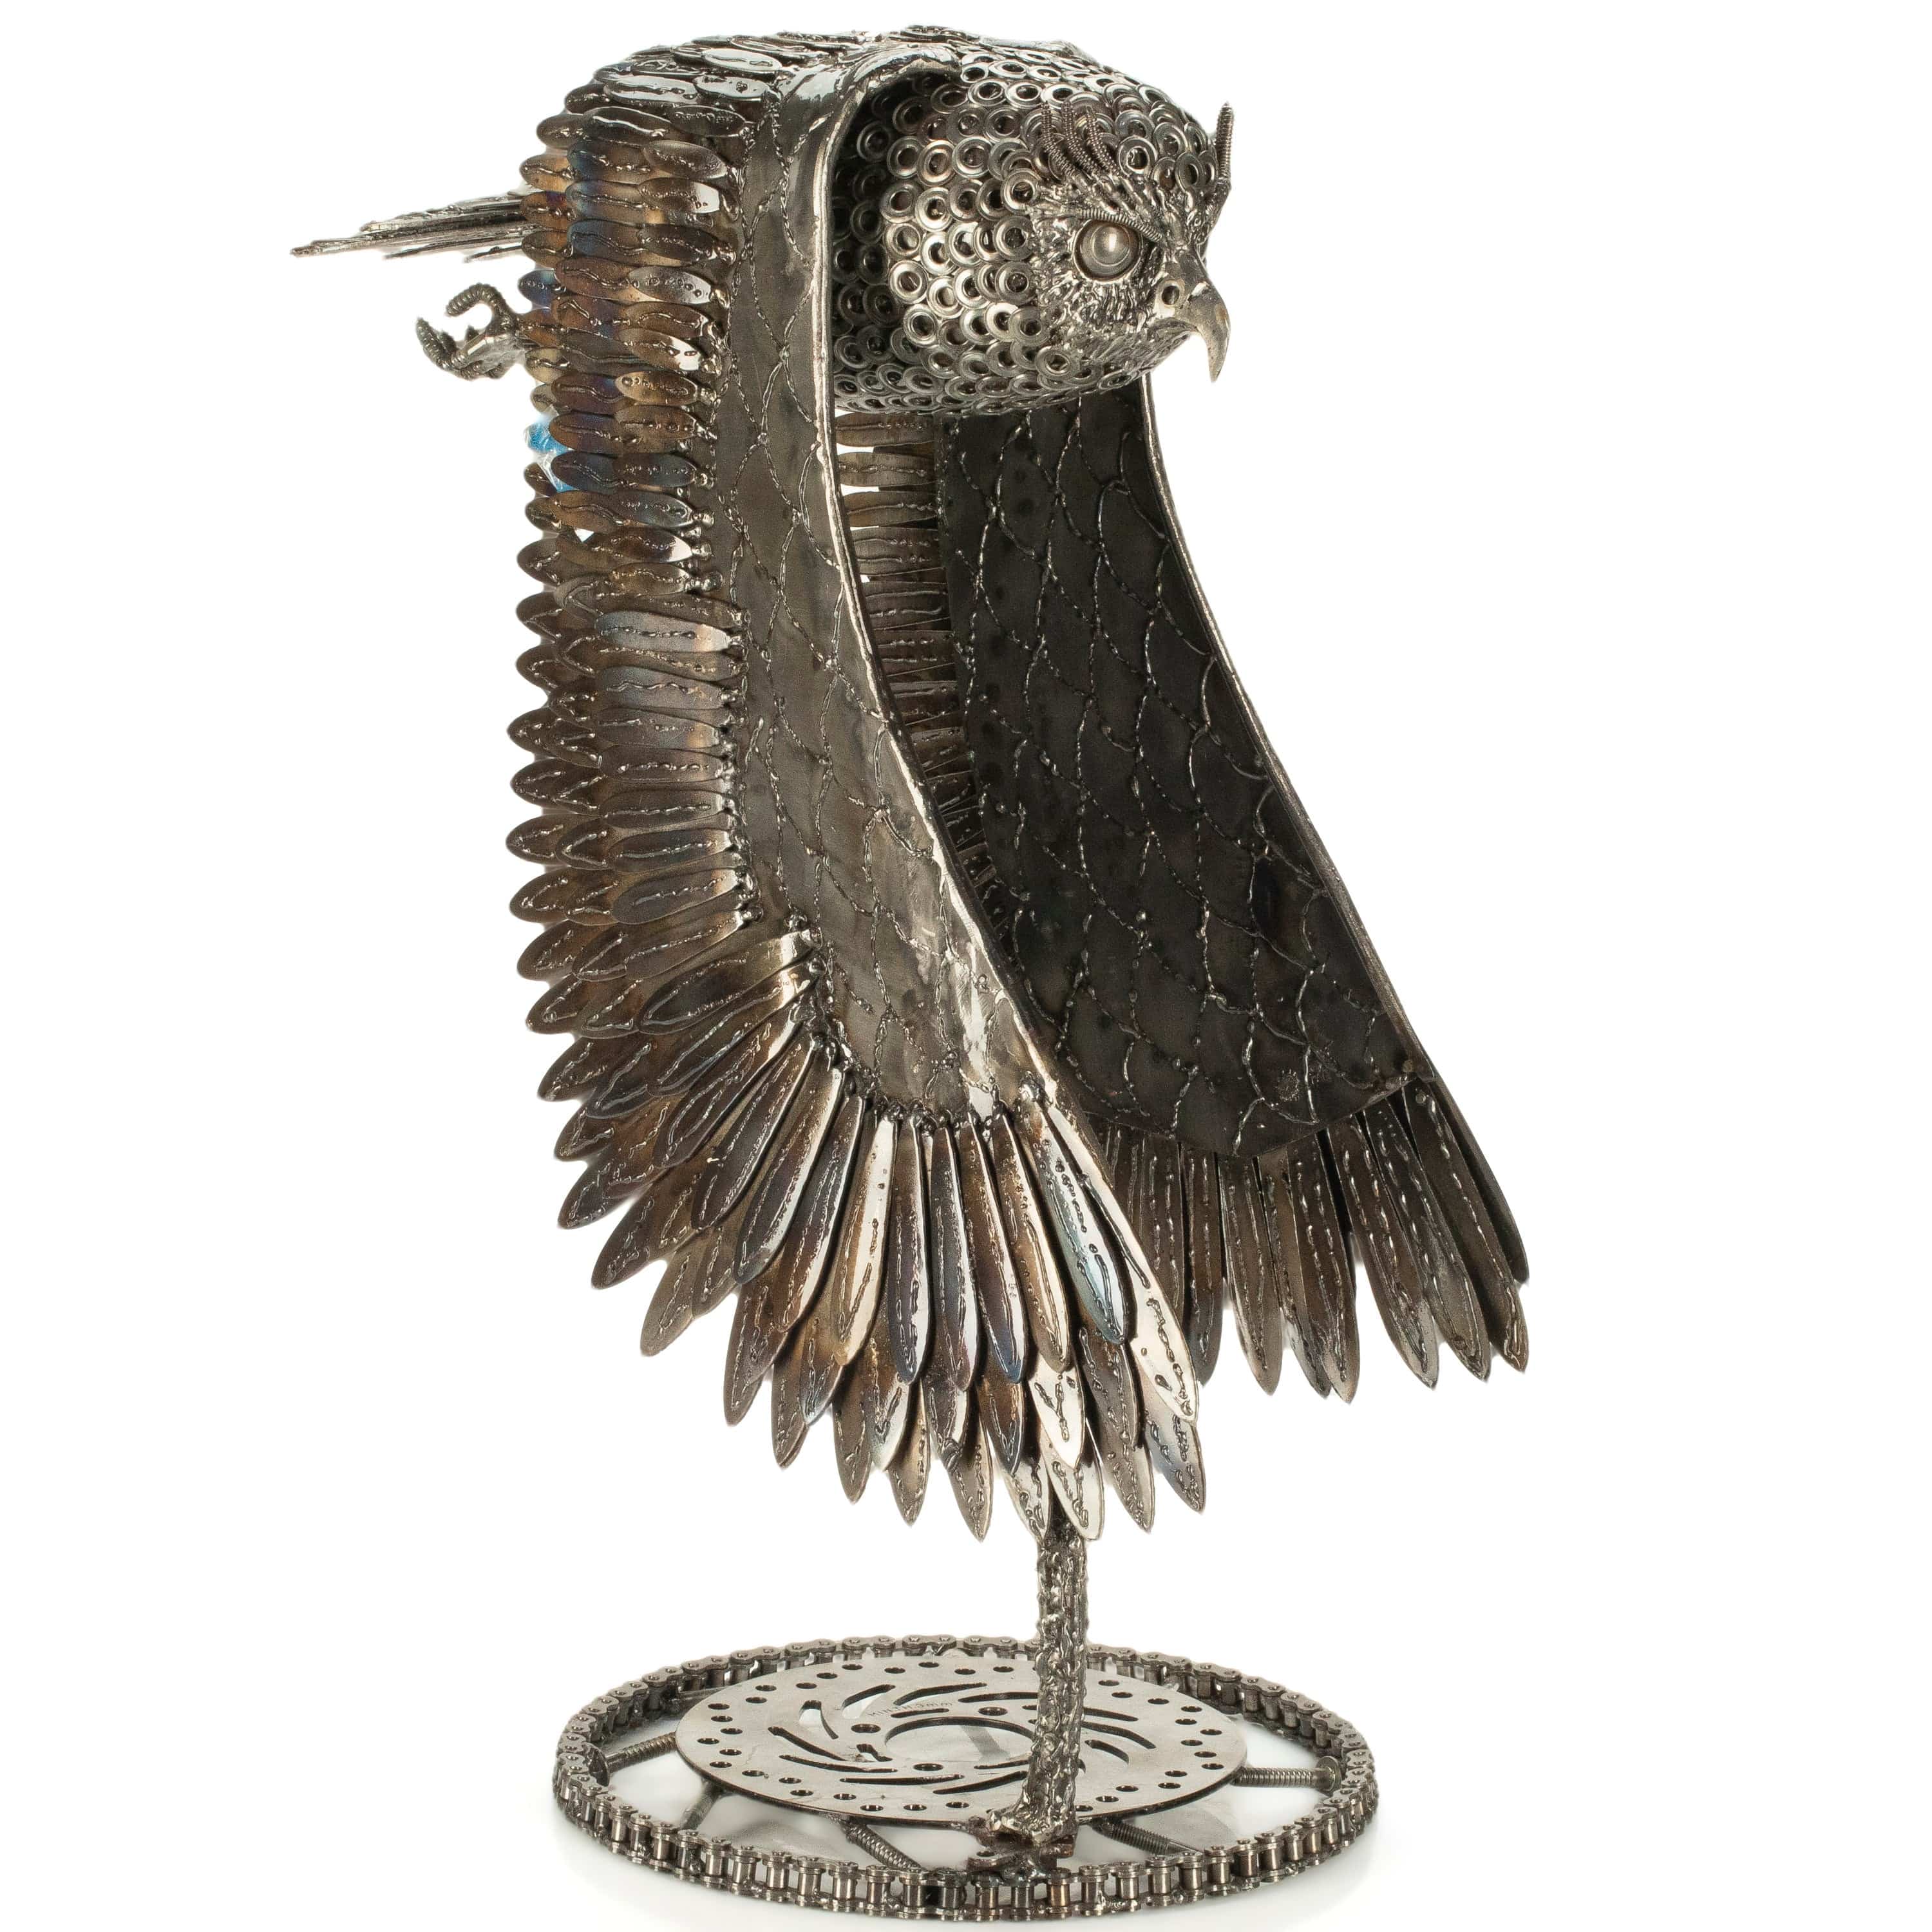 KALIFANO Recycled Metal Art 27" Flying Owl Inspired Recycled Metal Art Sculpture RMS-OWL45x68-PK